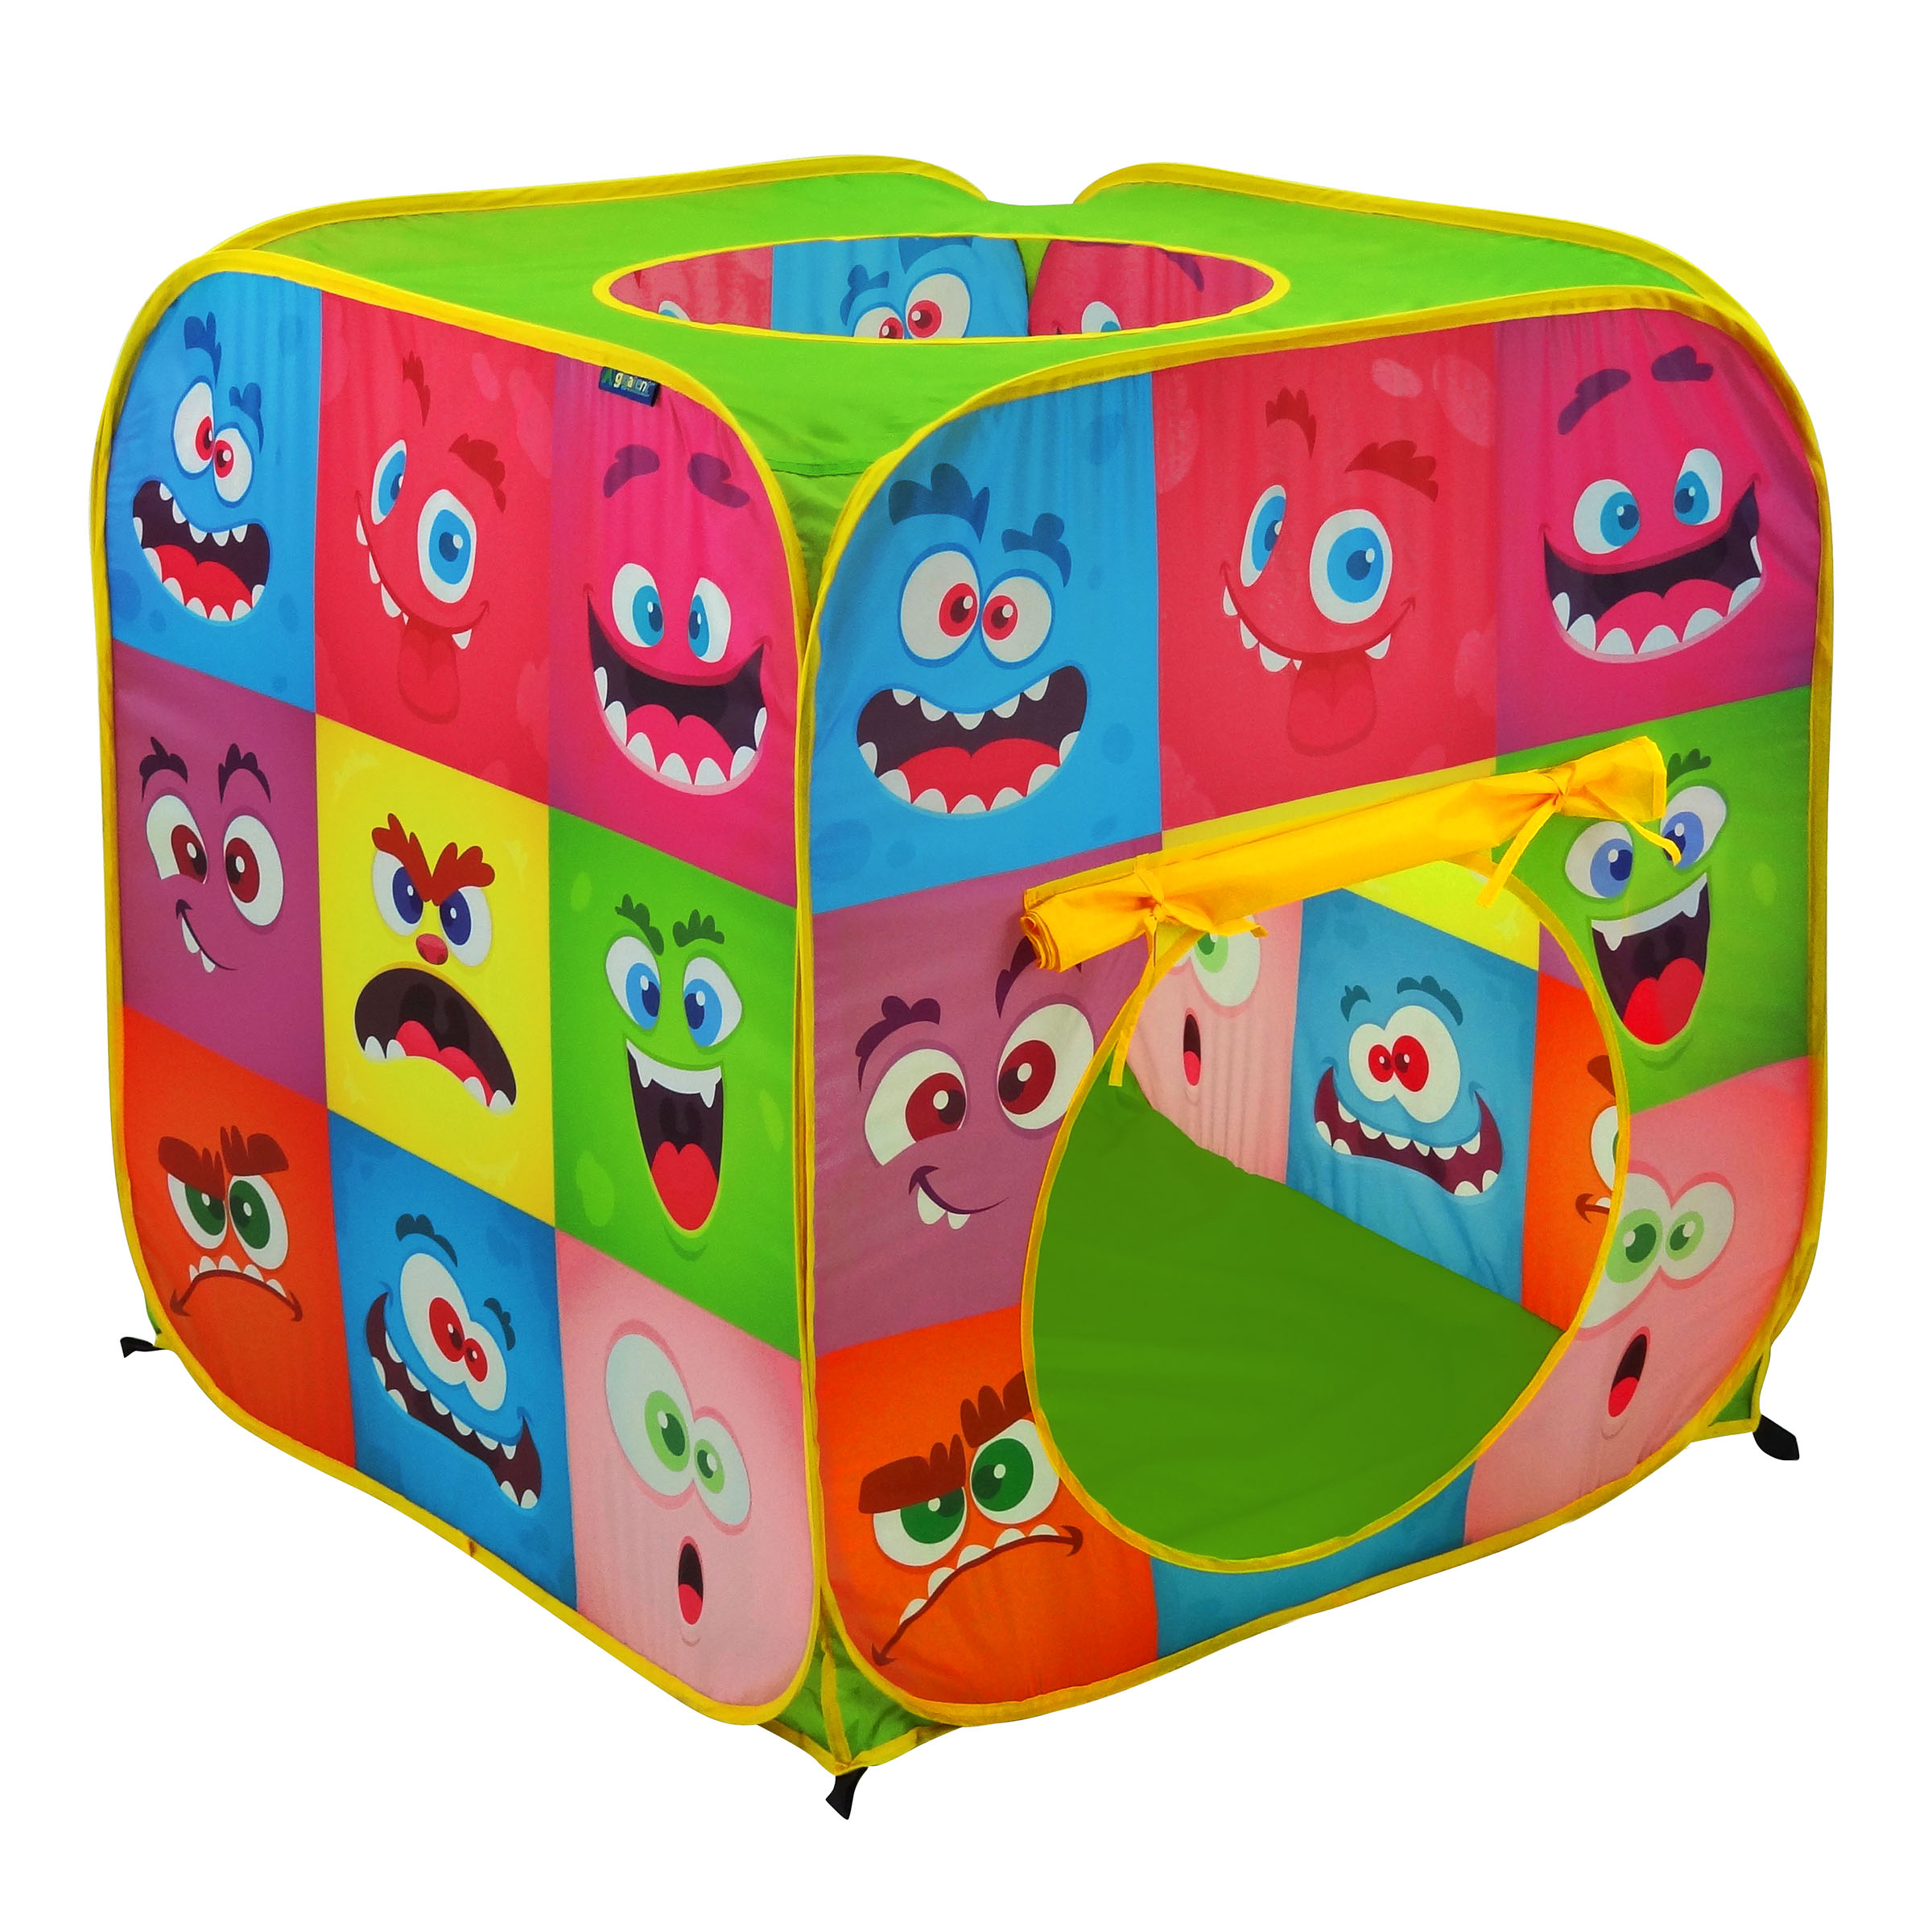 Monster Cube play tent cube - image 2 of 5